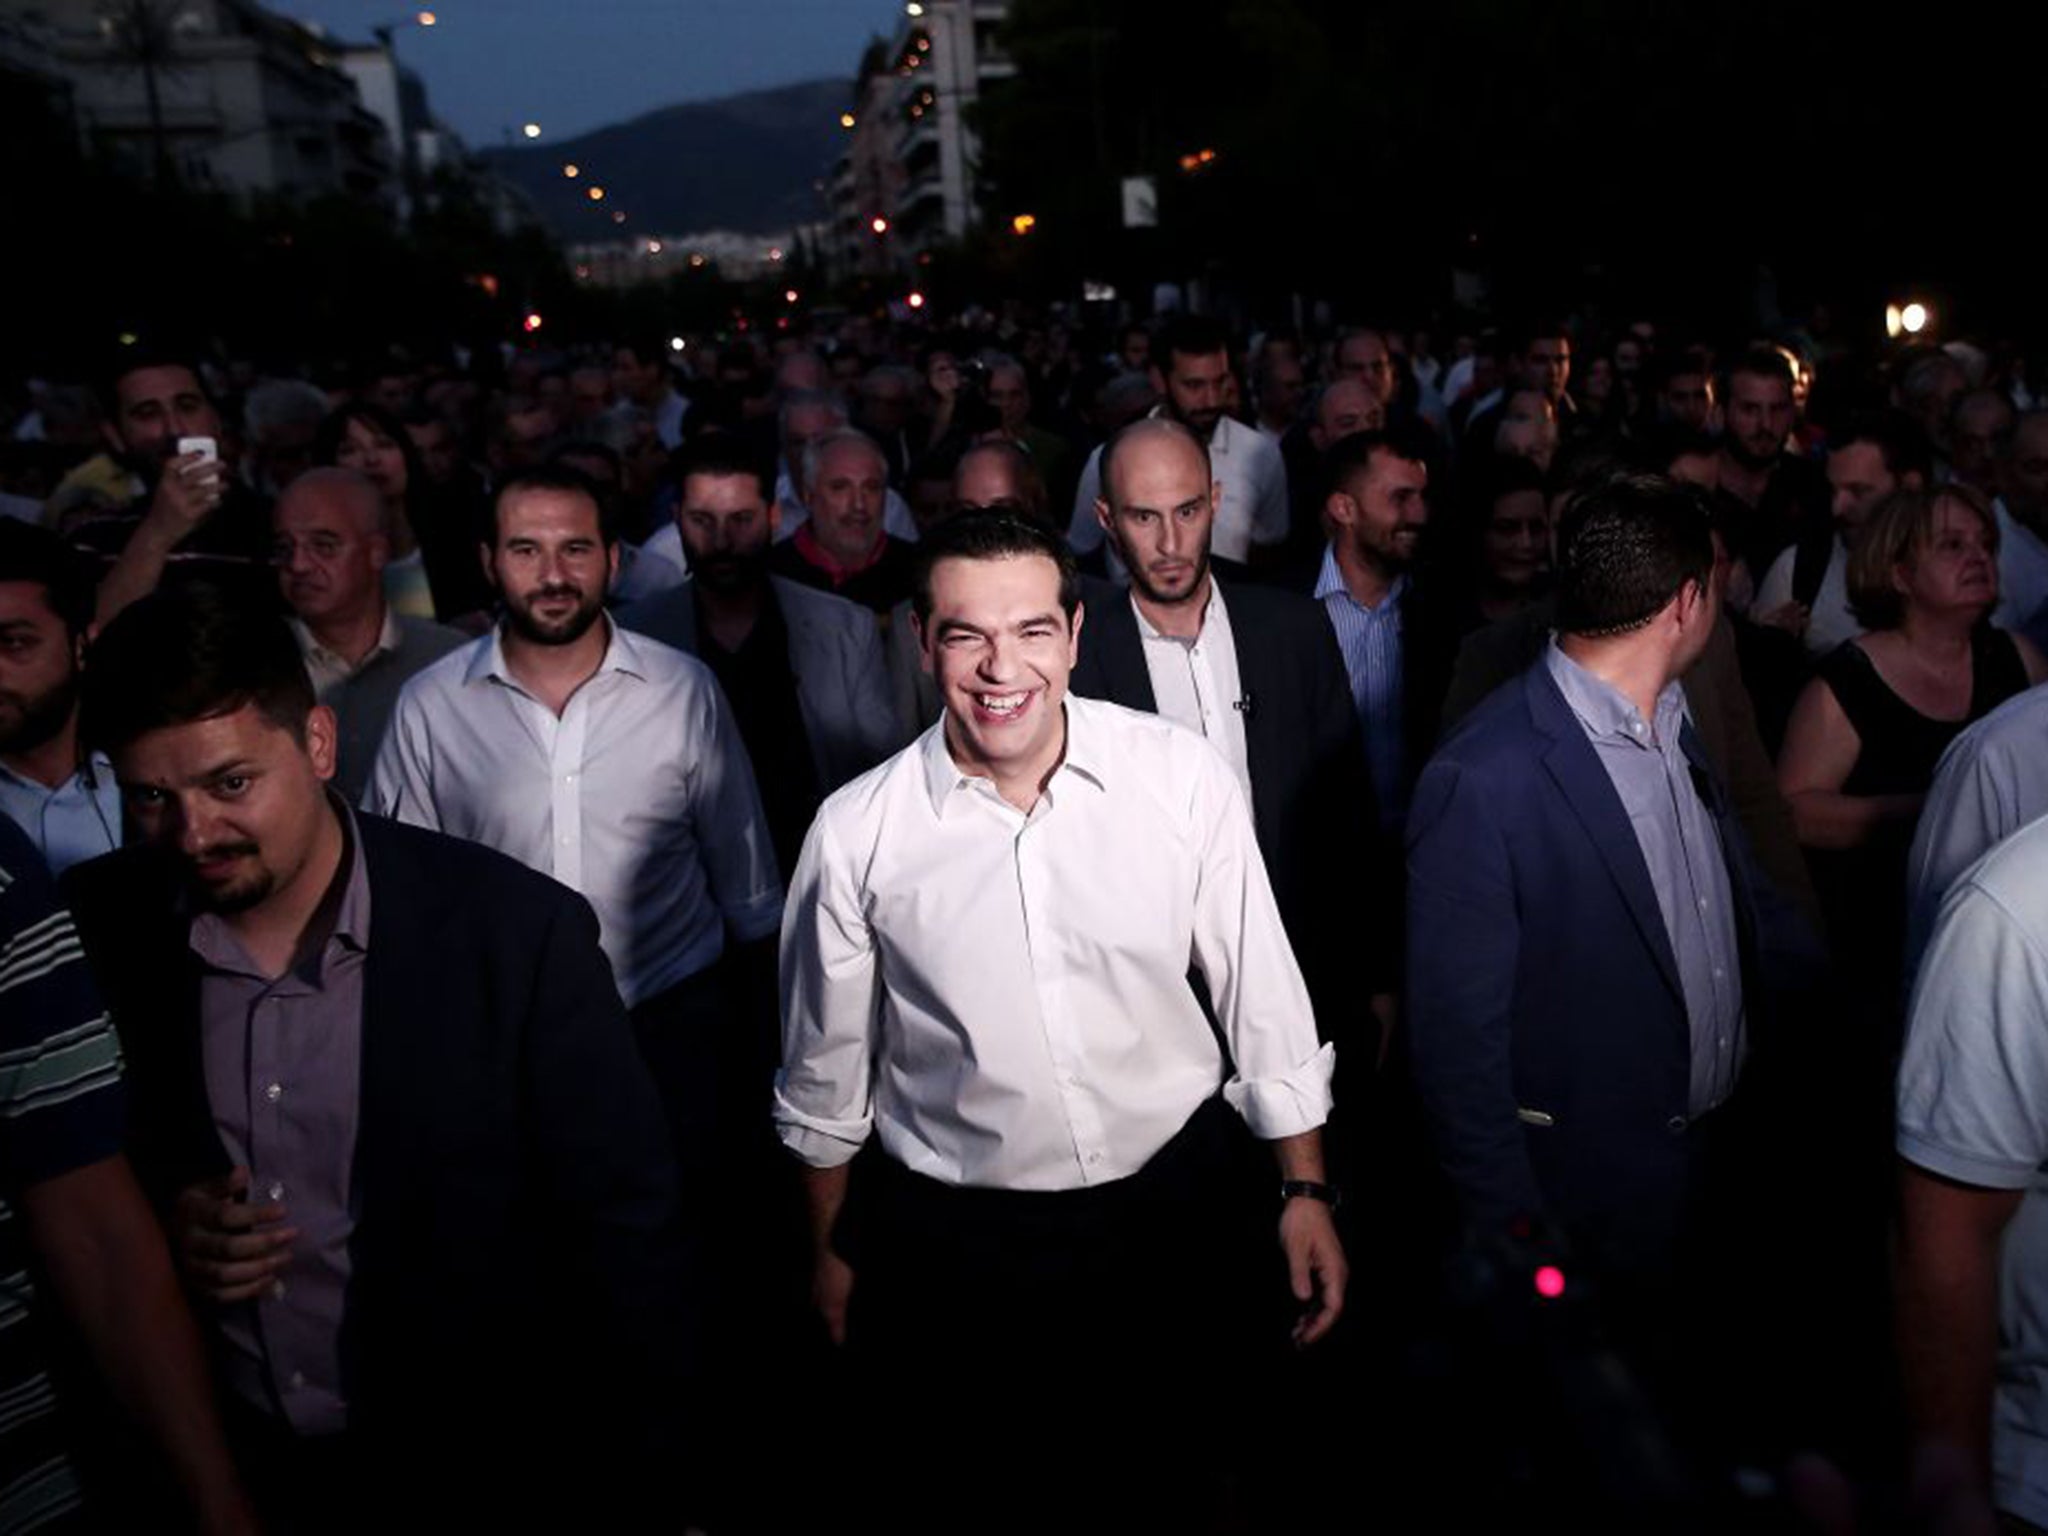 PM Alexis Tsipras has called on voters to reject creditors’ proposals for more austerity in return for rescue loans